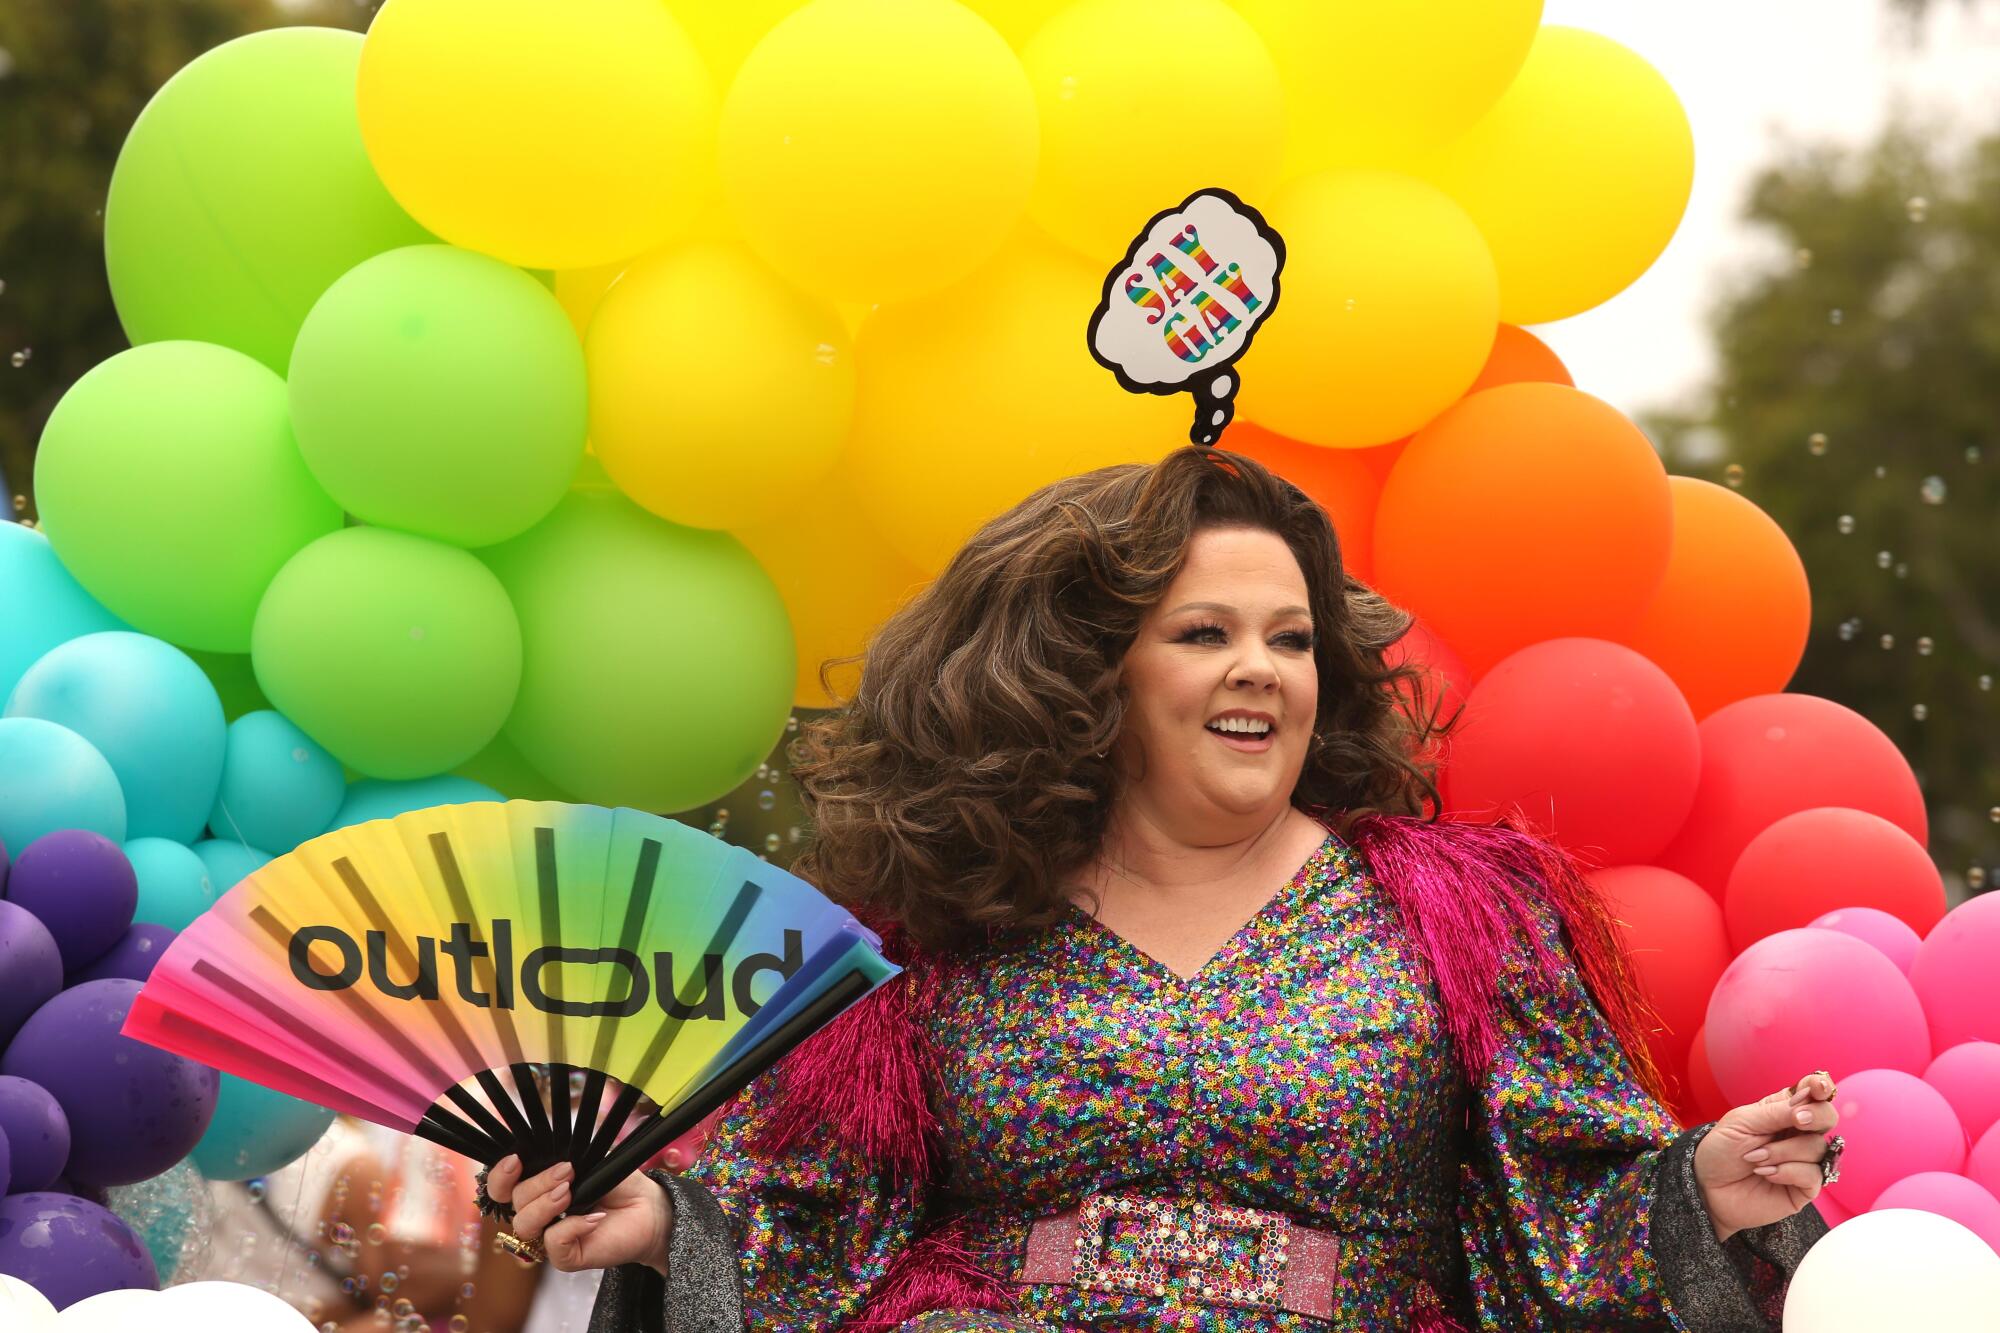 Melissa McCarthy in a sparkling gown against a backdrop of multicolored balloons.